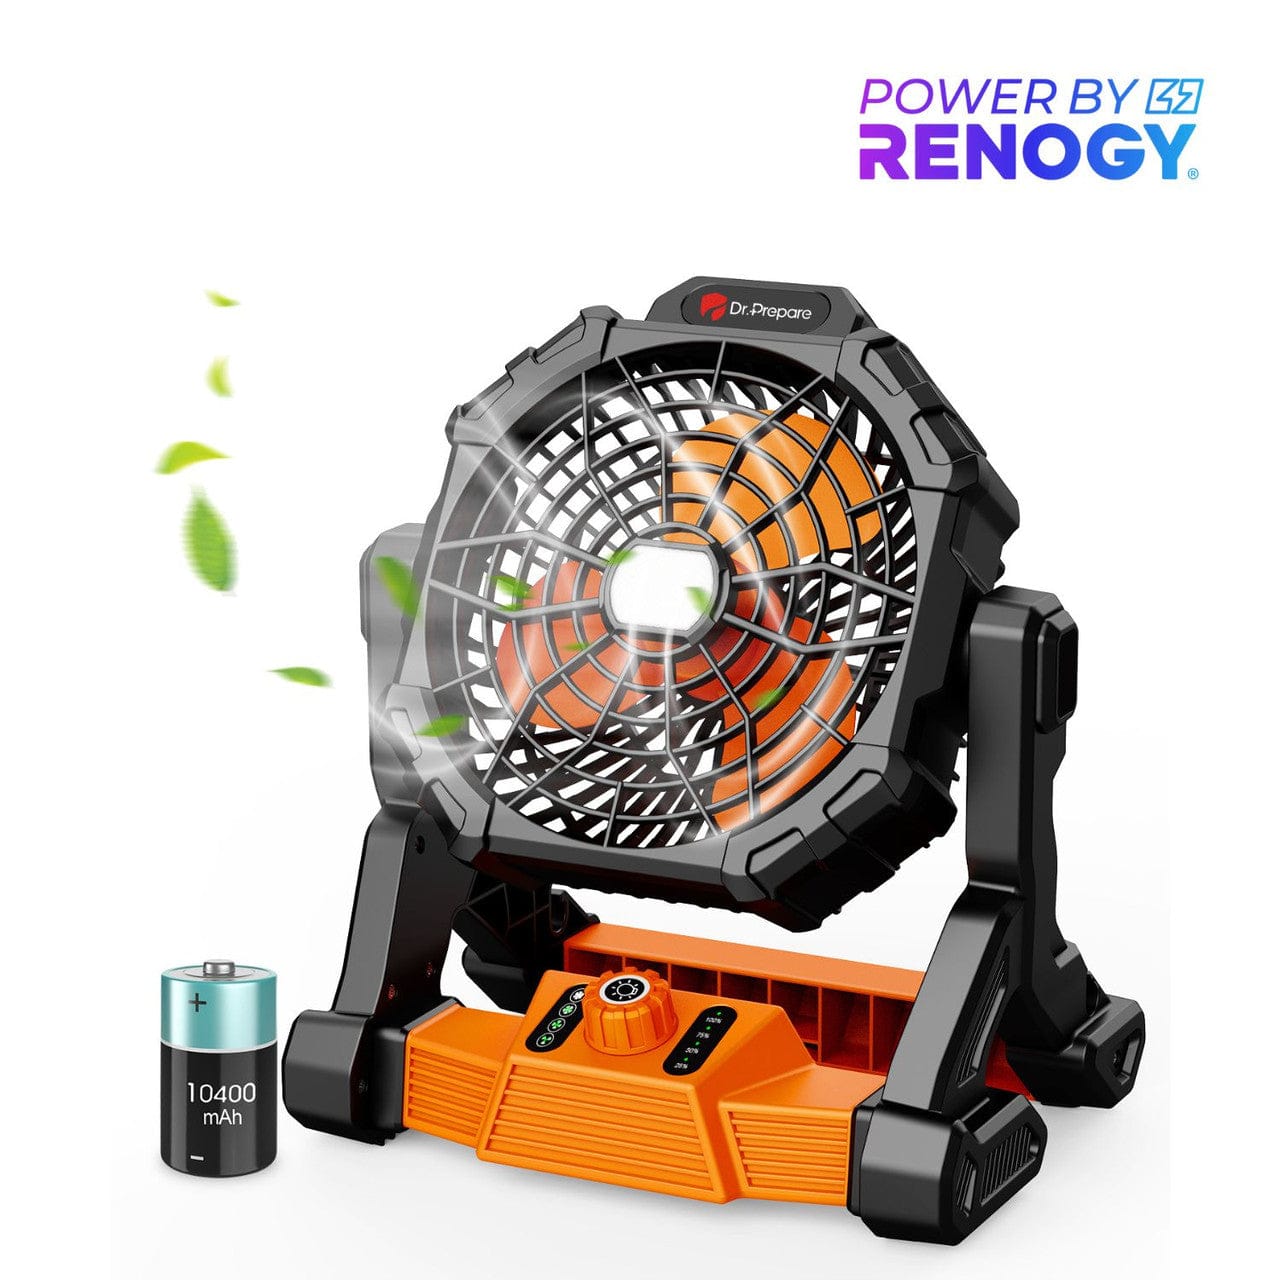 Renogy Dr.Prepare X25 Portable Camping Fan with LED Light Renogy Portable Air Conditioners